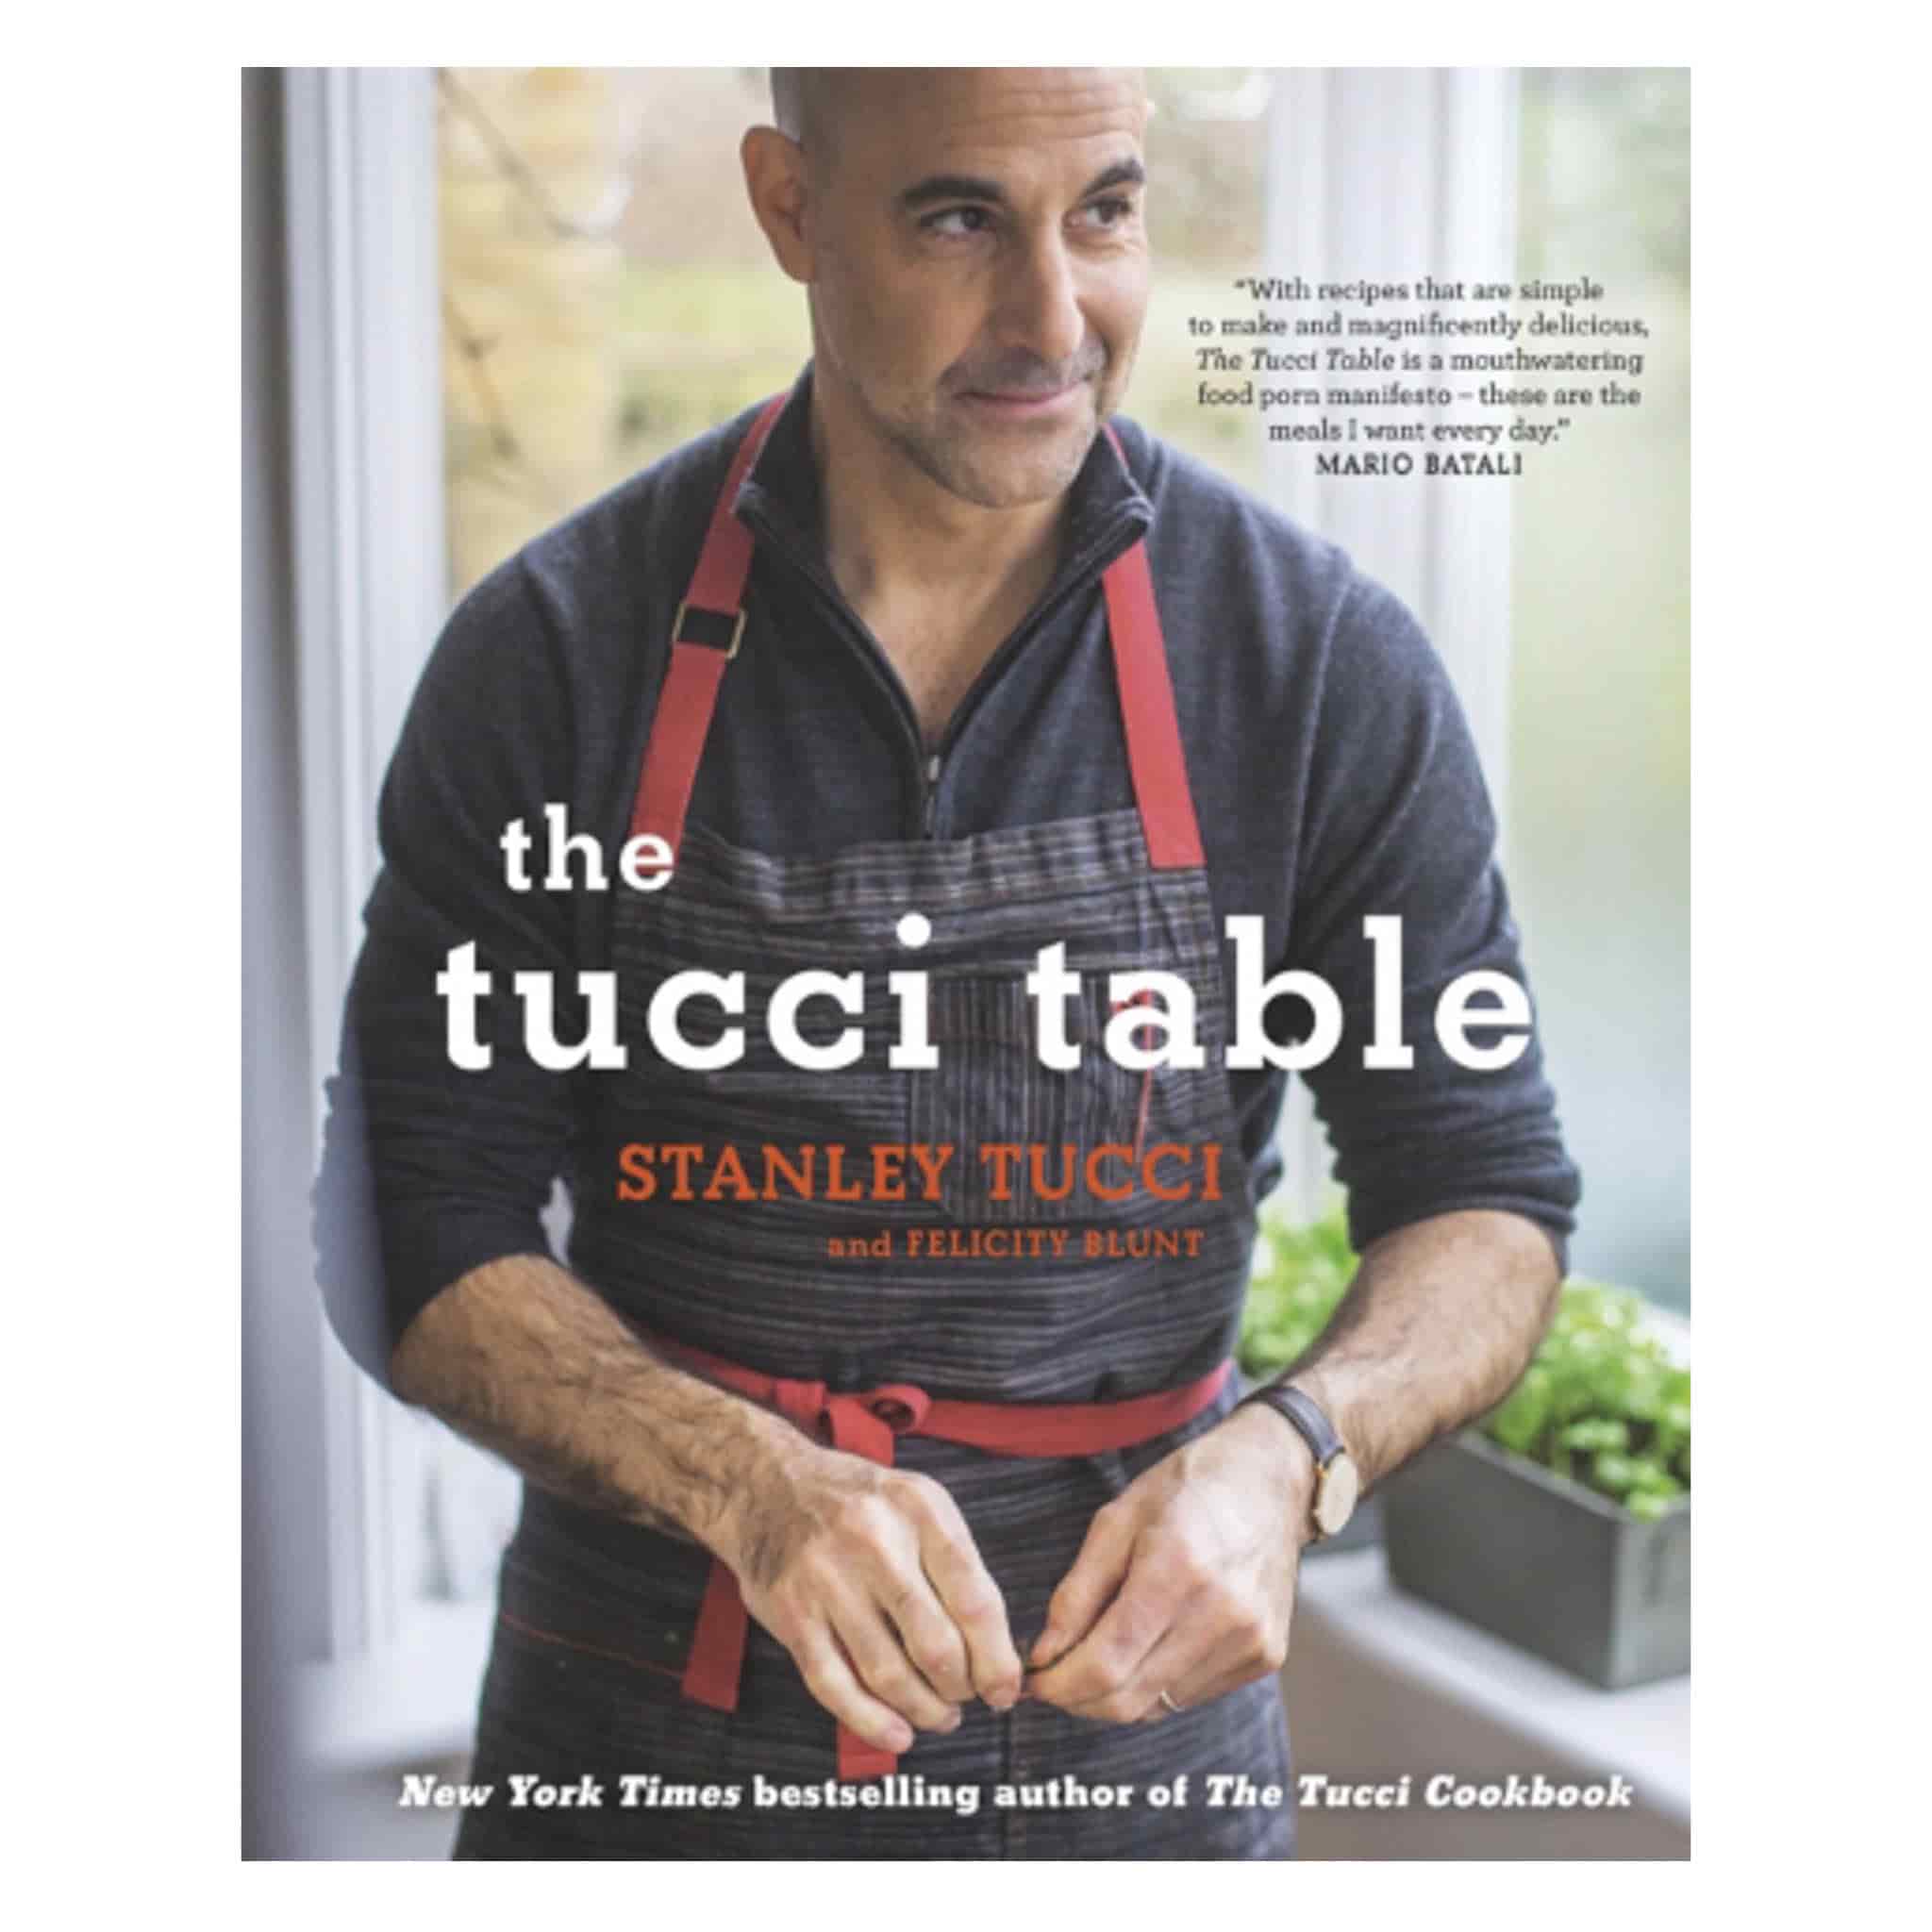 The Tucci Table: Cooking with Family and Friends, by Stanley Tucci and Felicity Blunt